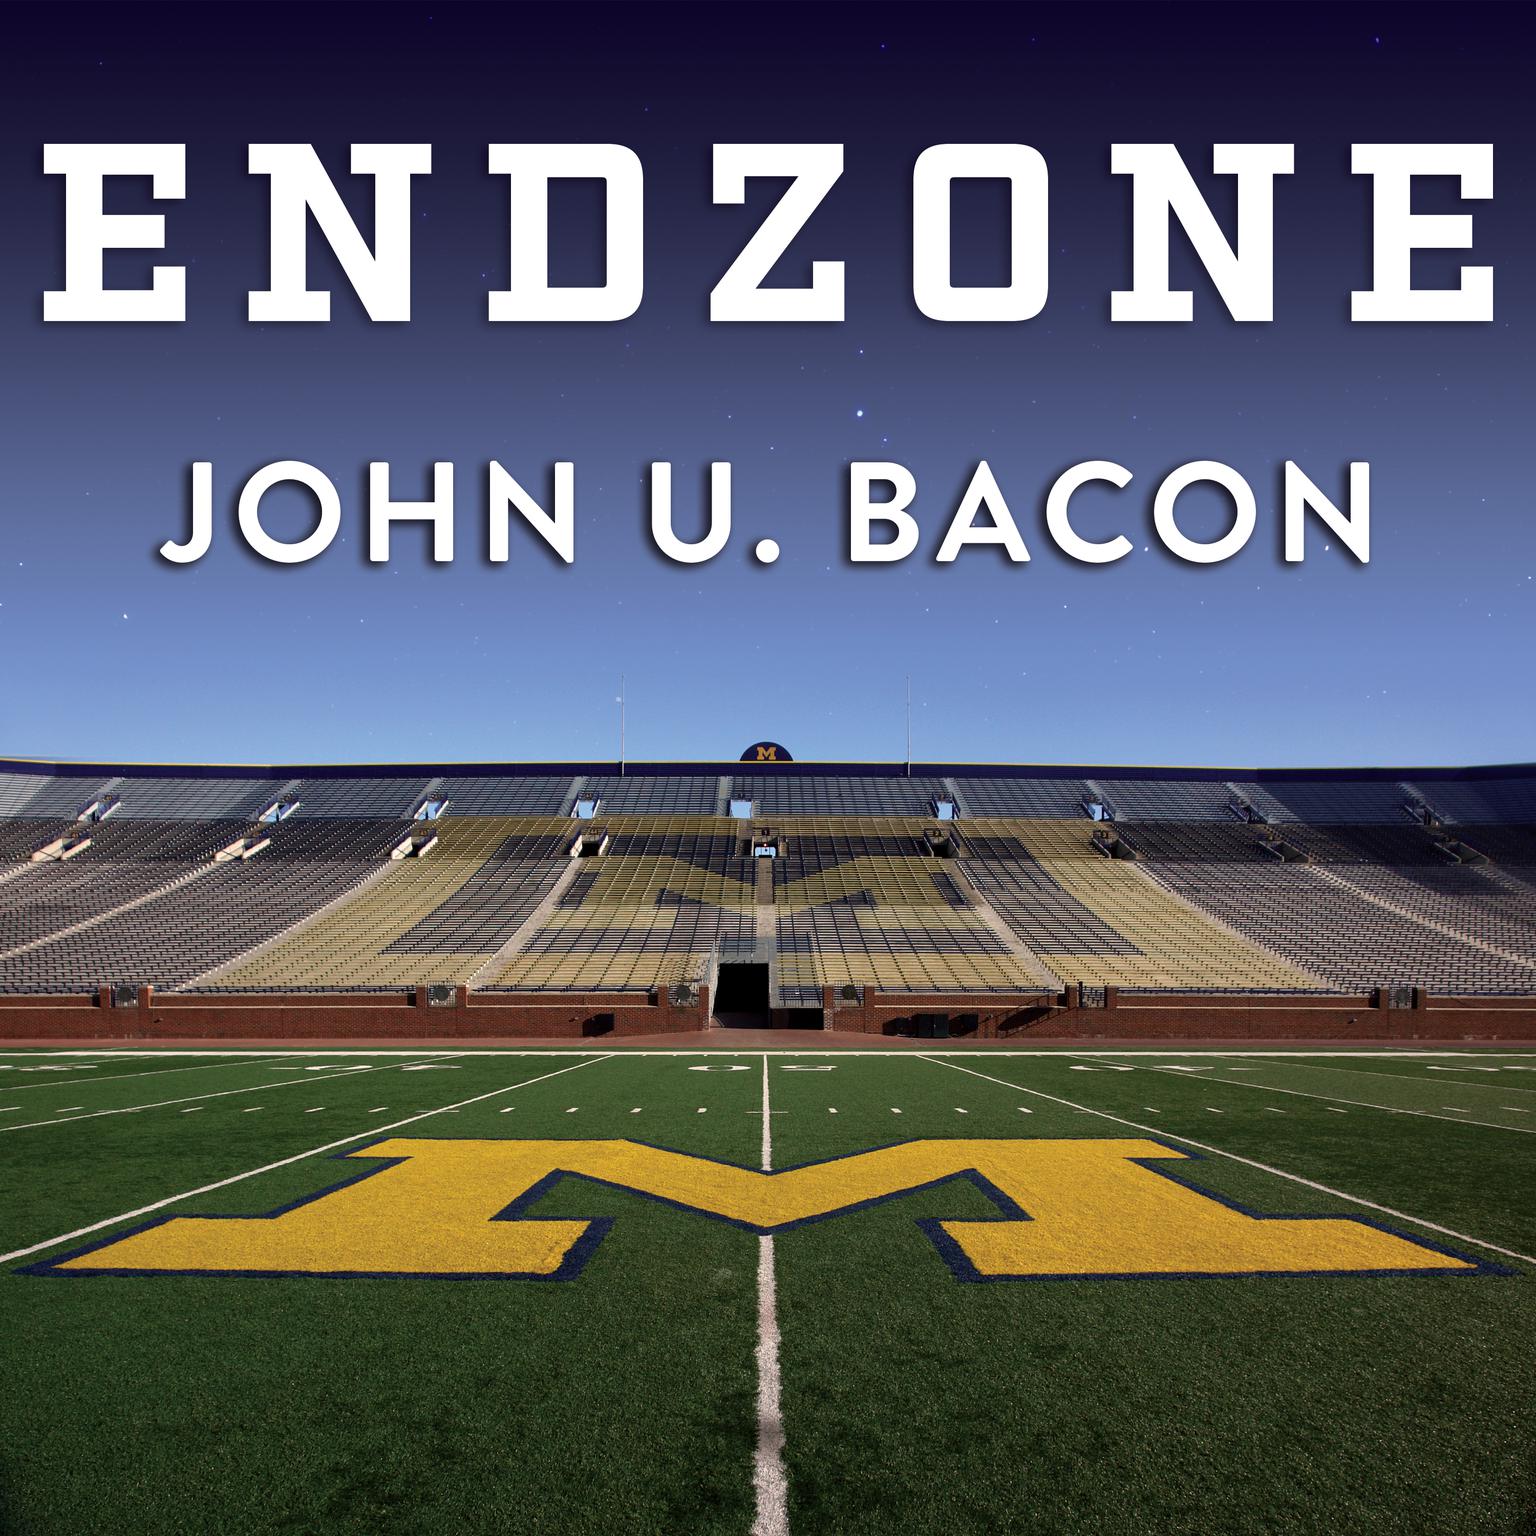 Endzone: The Rise, Fall, and Return of Michigan Football Audiobook, by John U. Bacon